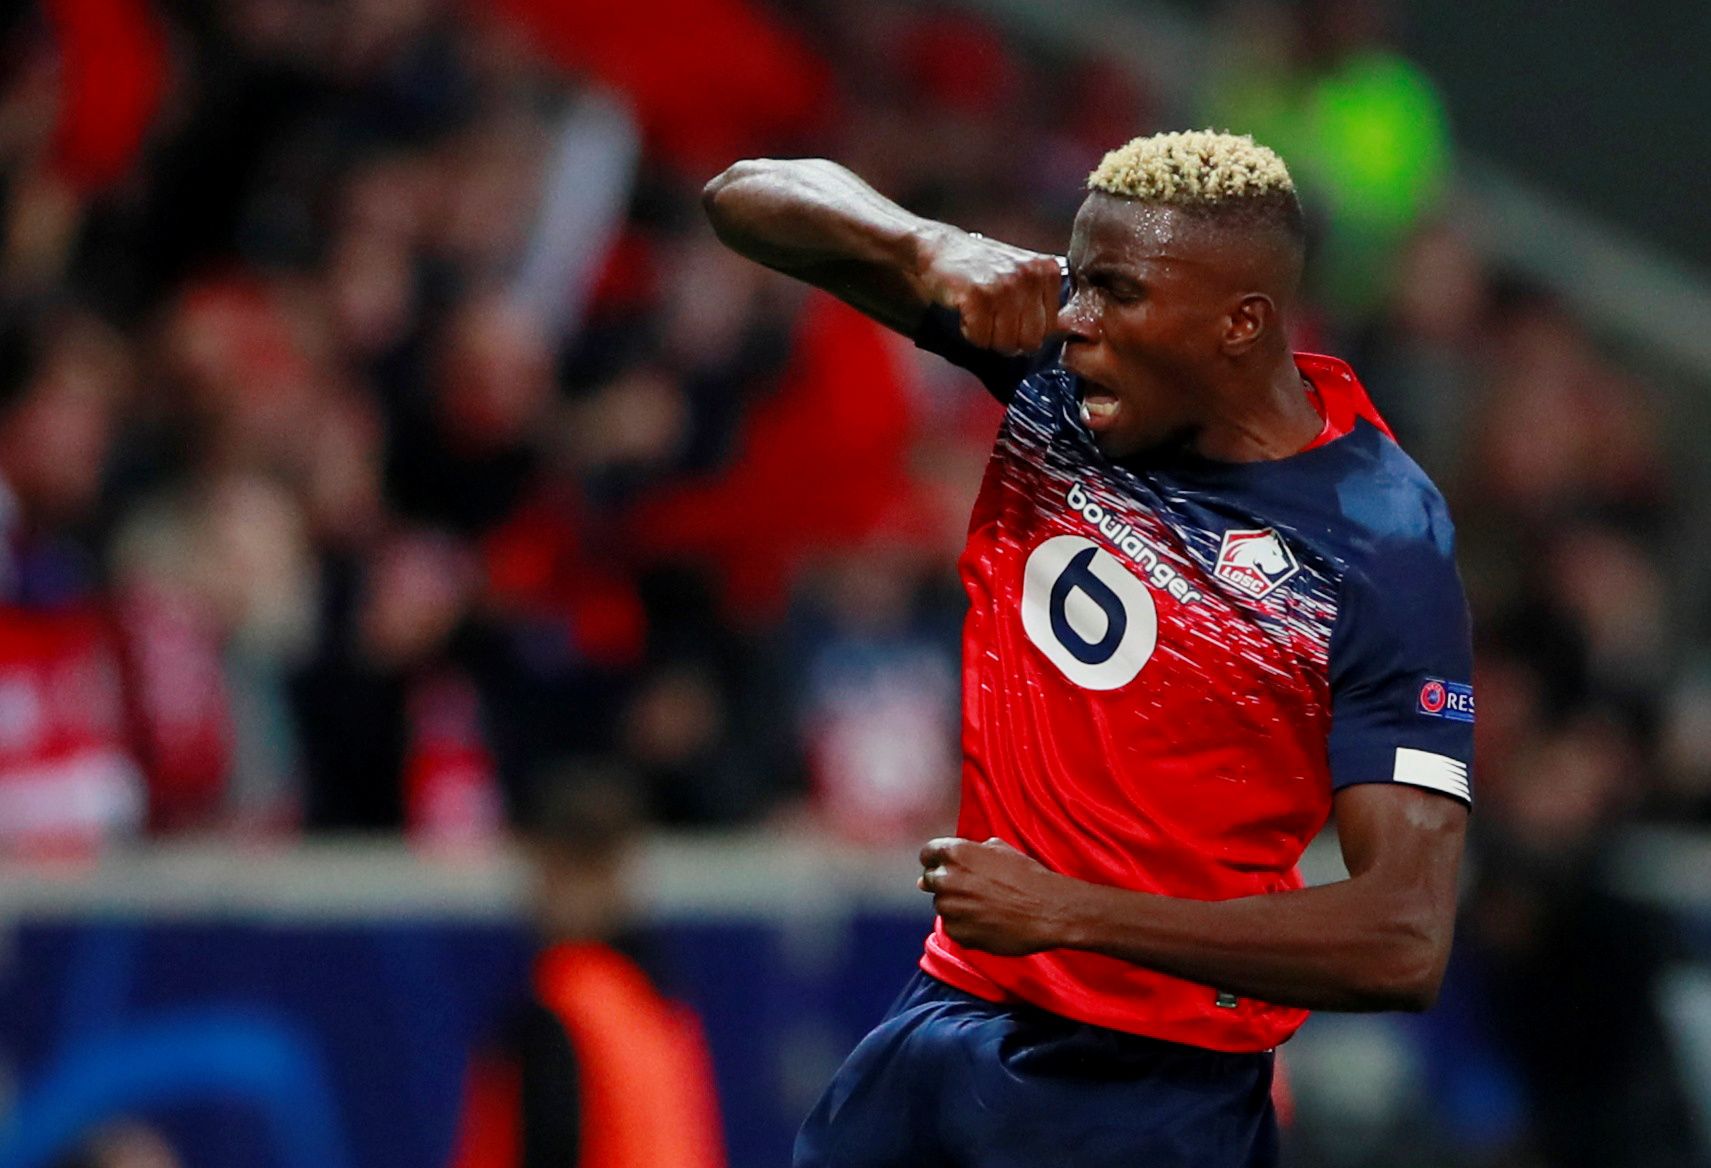 Soccer Football - Champions League - Group H - Lille v Chelsea - Stade Pierre-Mauroy, Lille, France - October 2, 2019  Lille's Victor Osimhen celebrates scoring their first goal   Action Images via Reuters/Andrew Couldridge